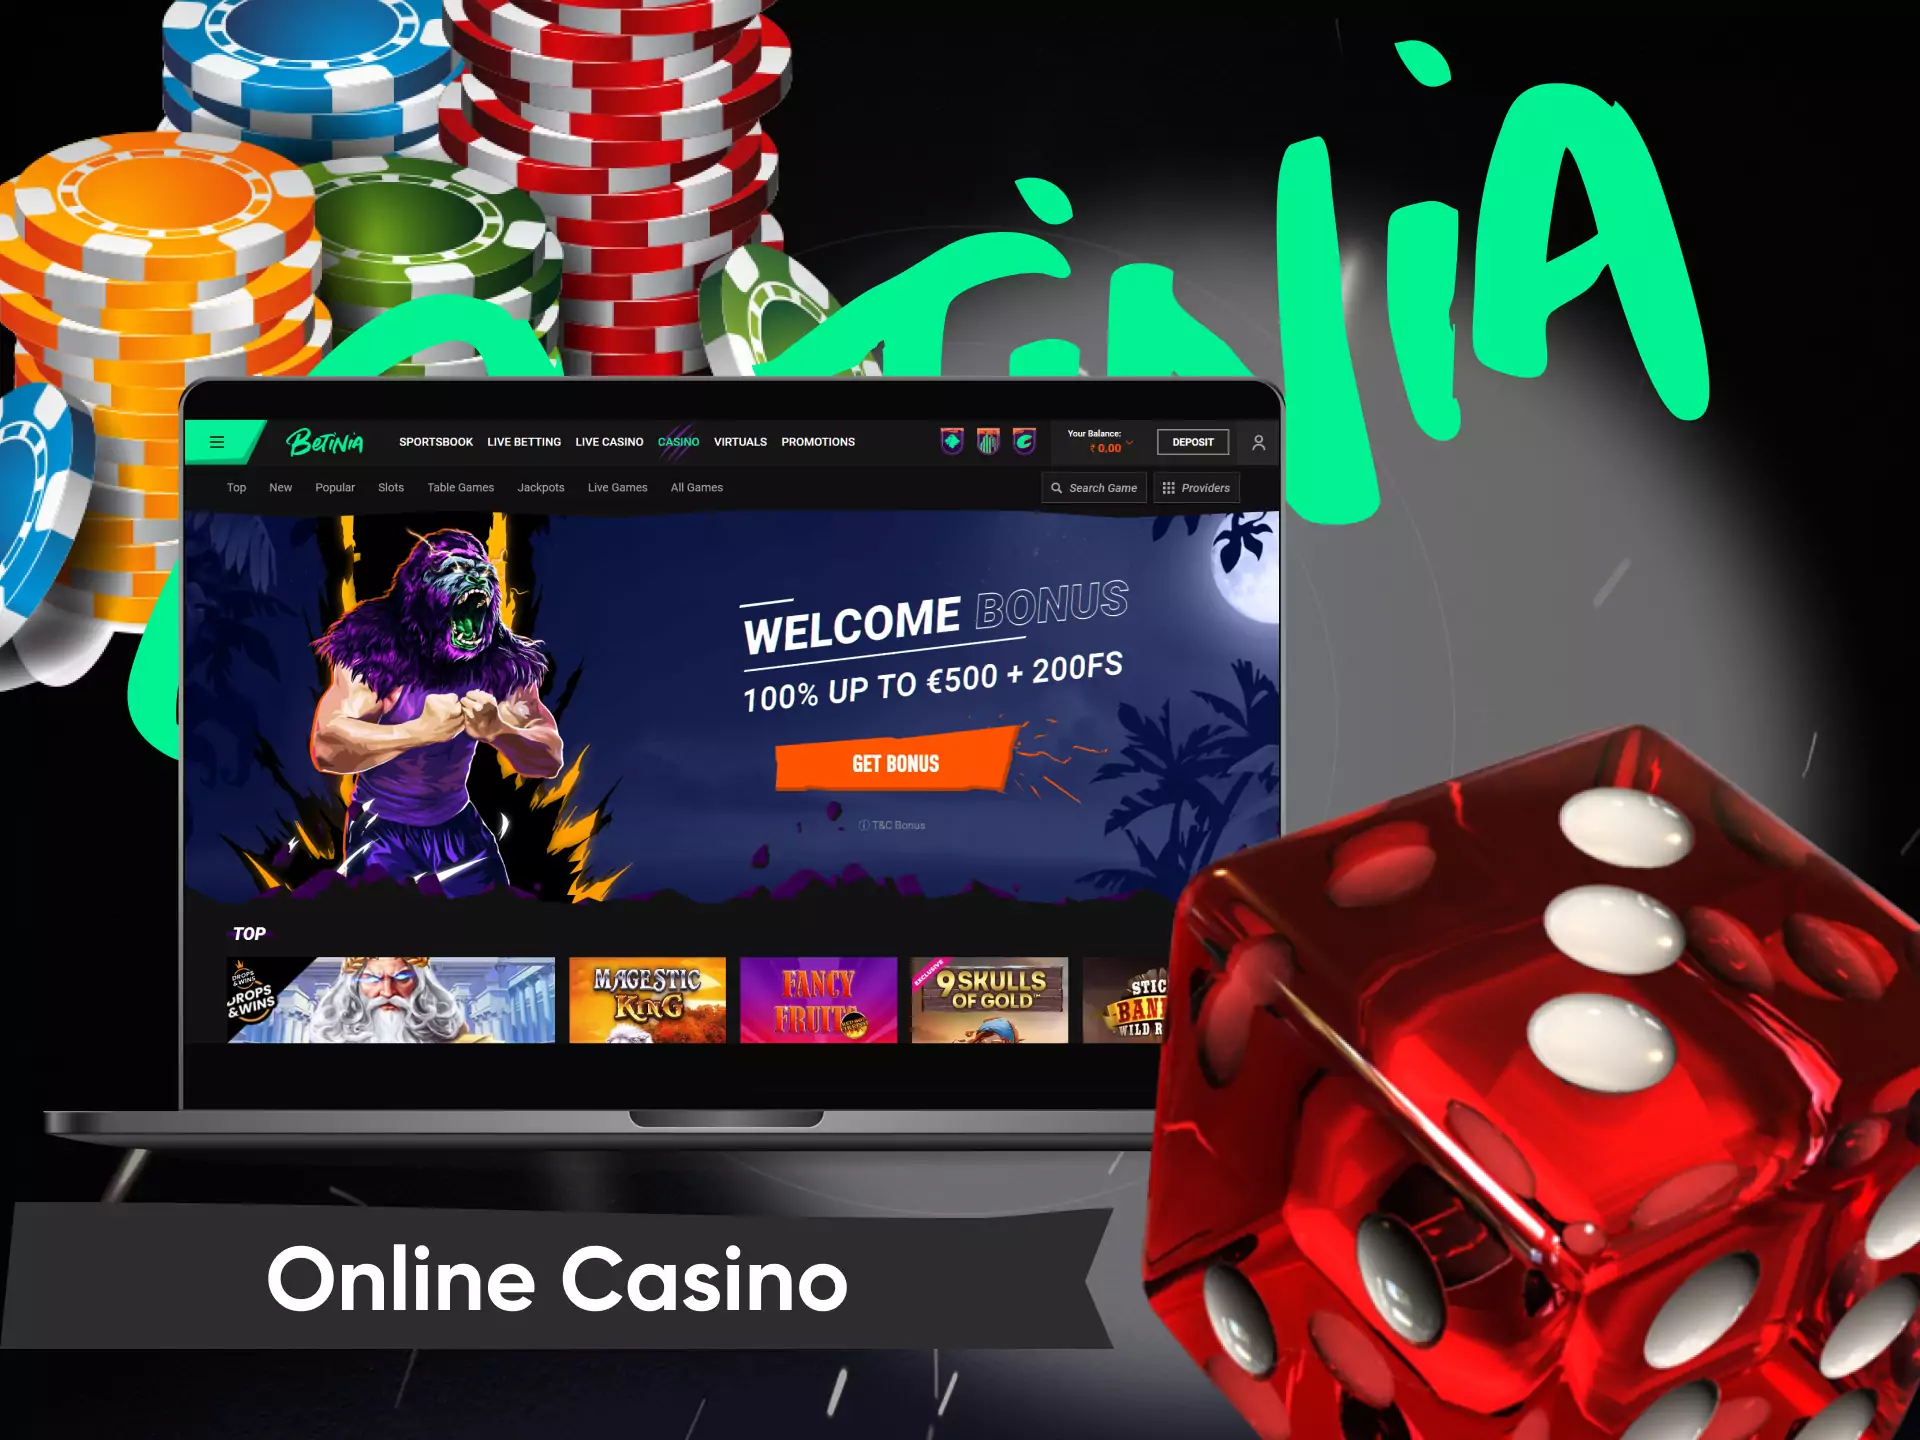 Besides sports and esports betting, on Betinia you can play casino games.